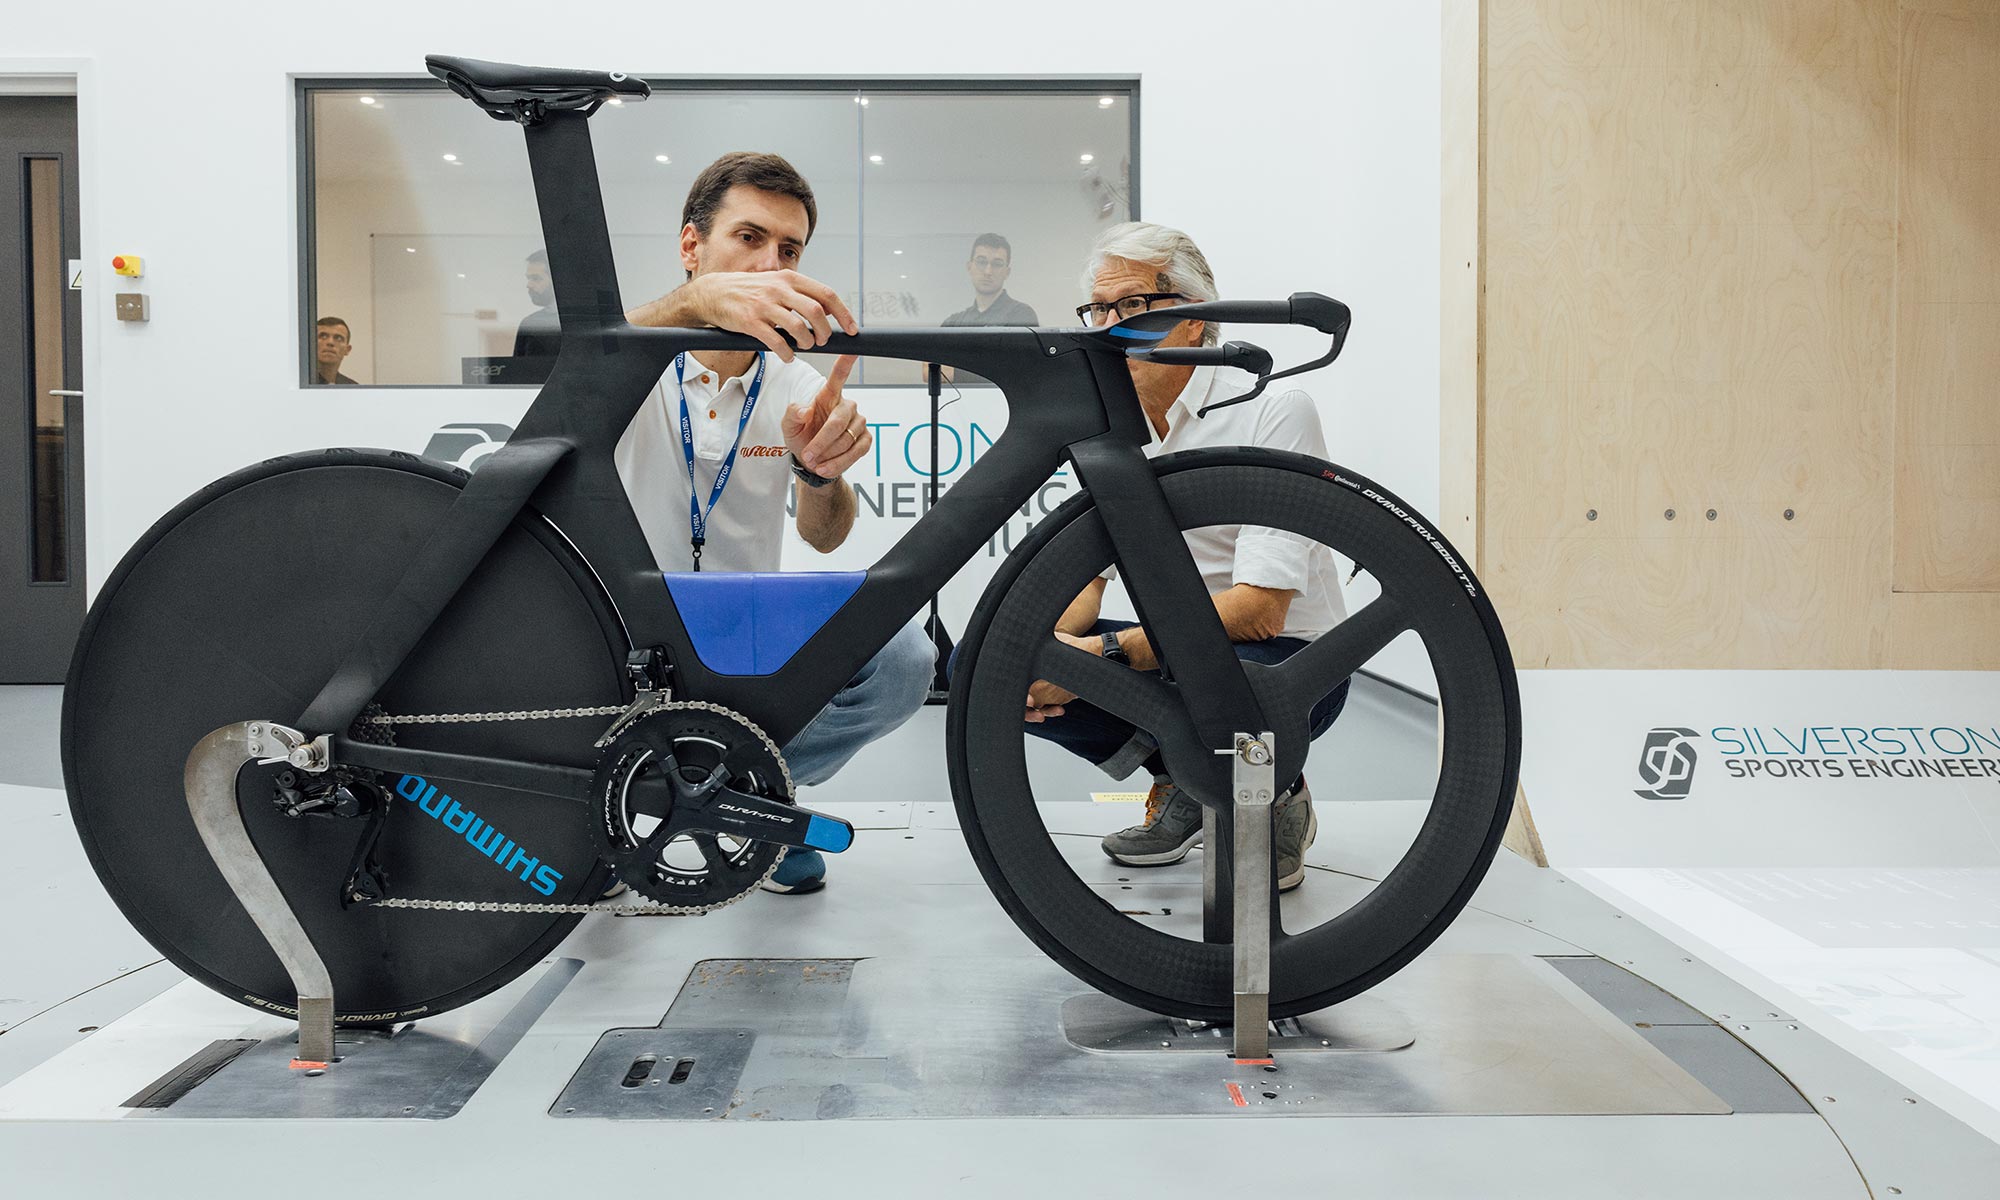 WiIier Supersonica SLR aero carbon time trial bike, wind tunnel testing setup